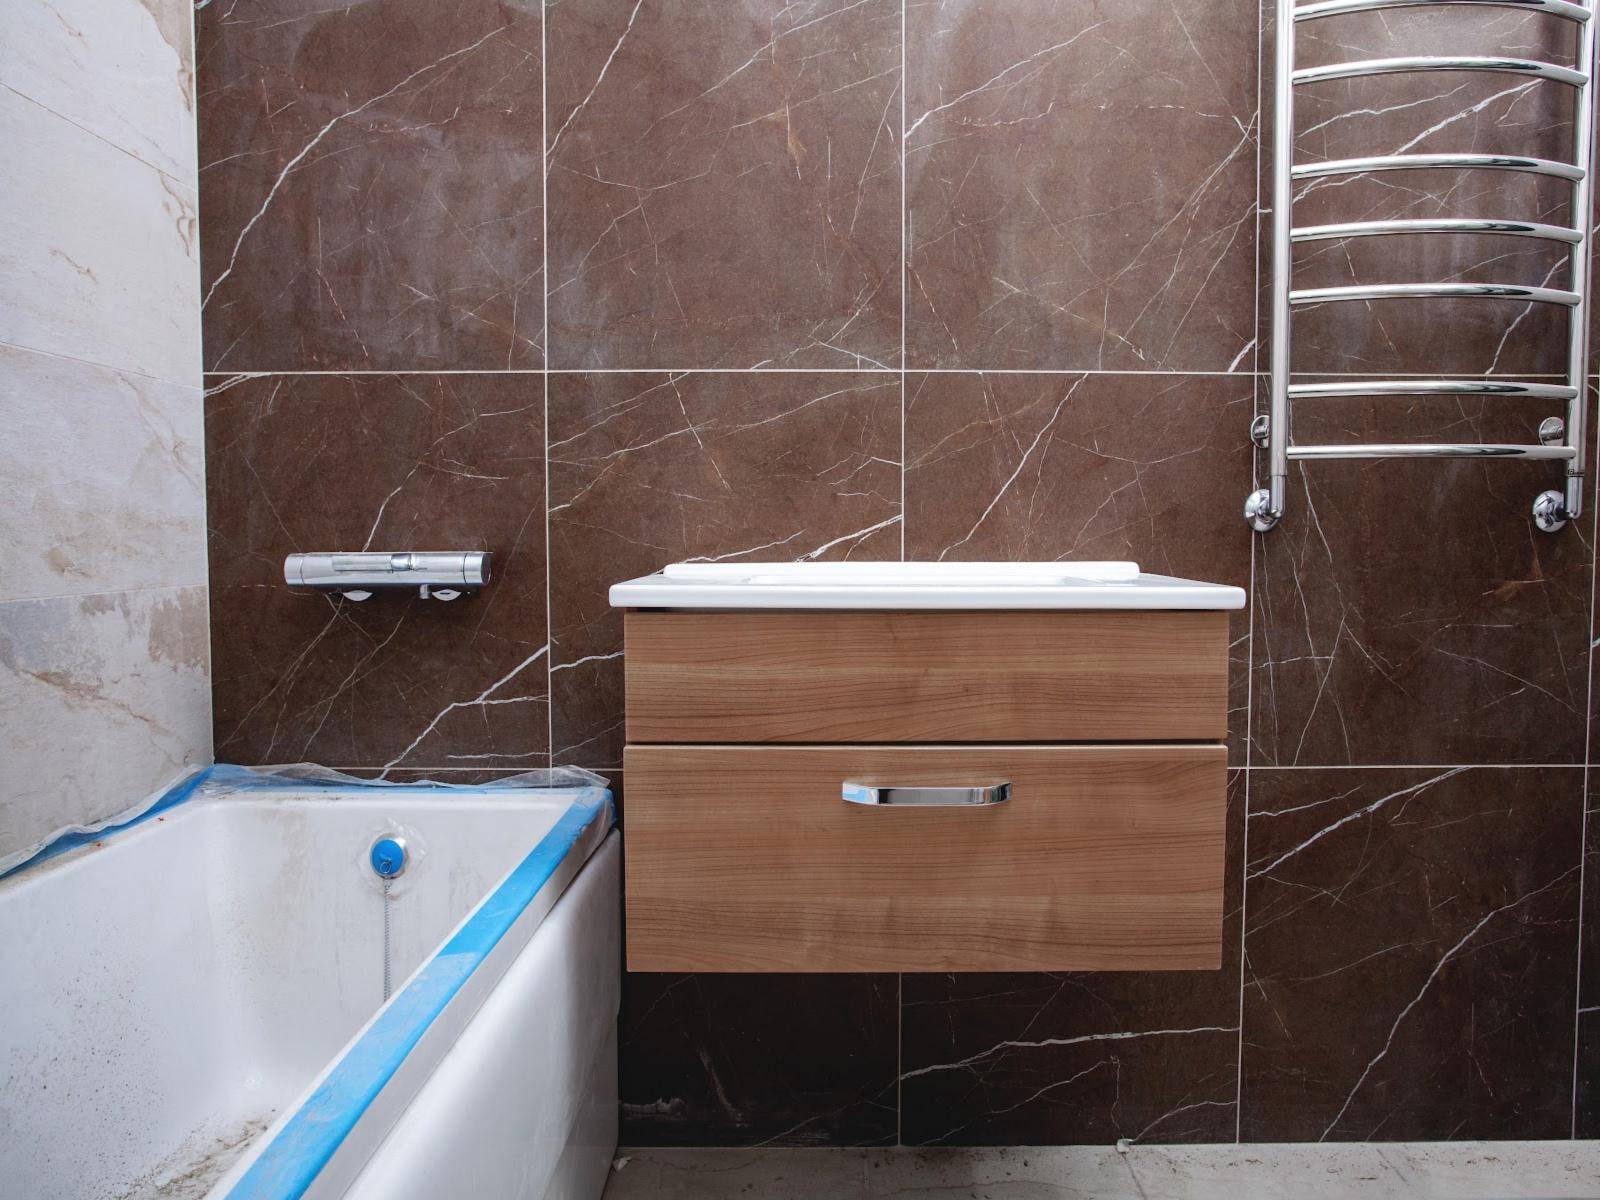 4 Ways To Update Your Outdated Bathroom